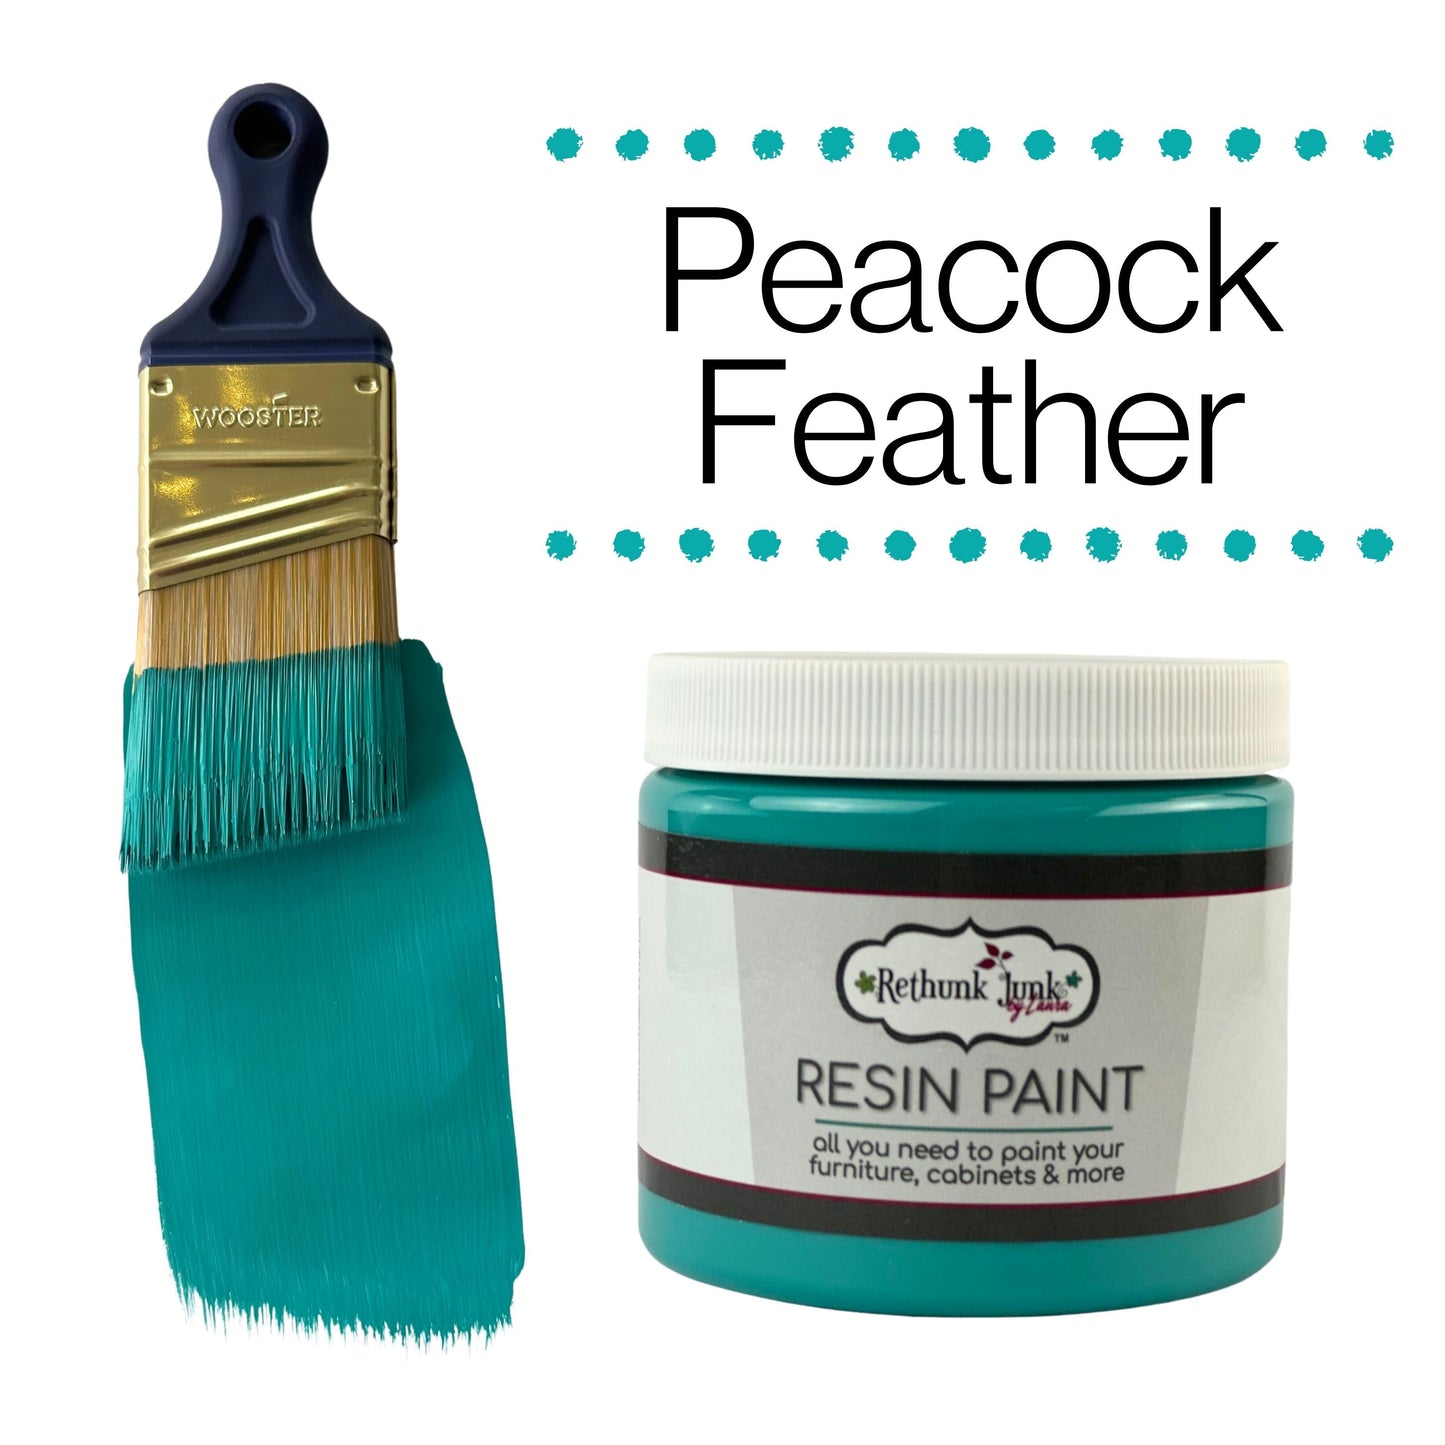 Peacock Feather Furniture and Cabinet Paint